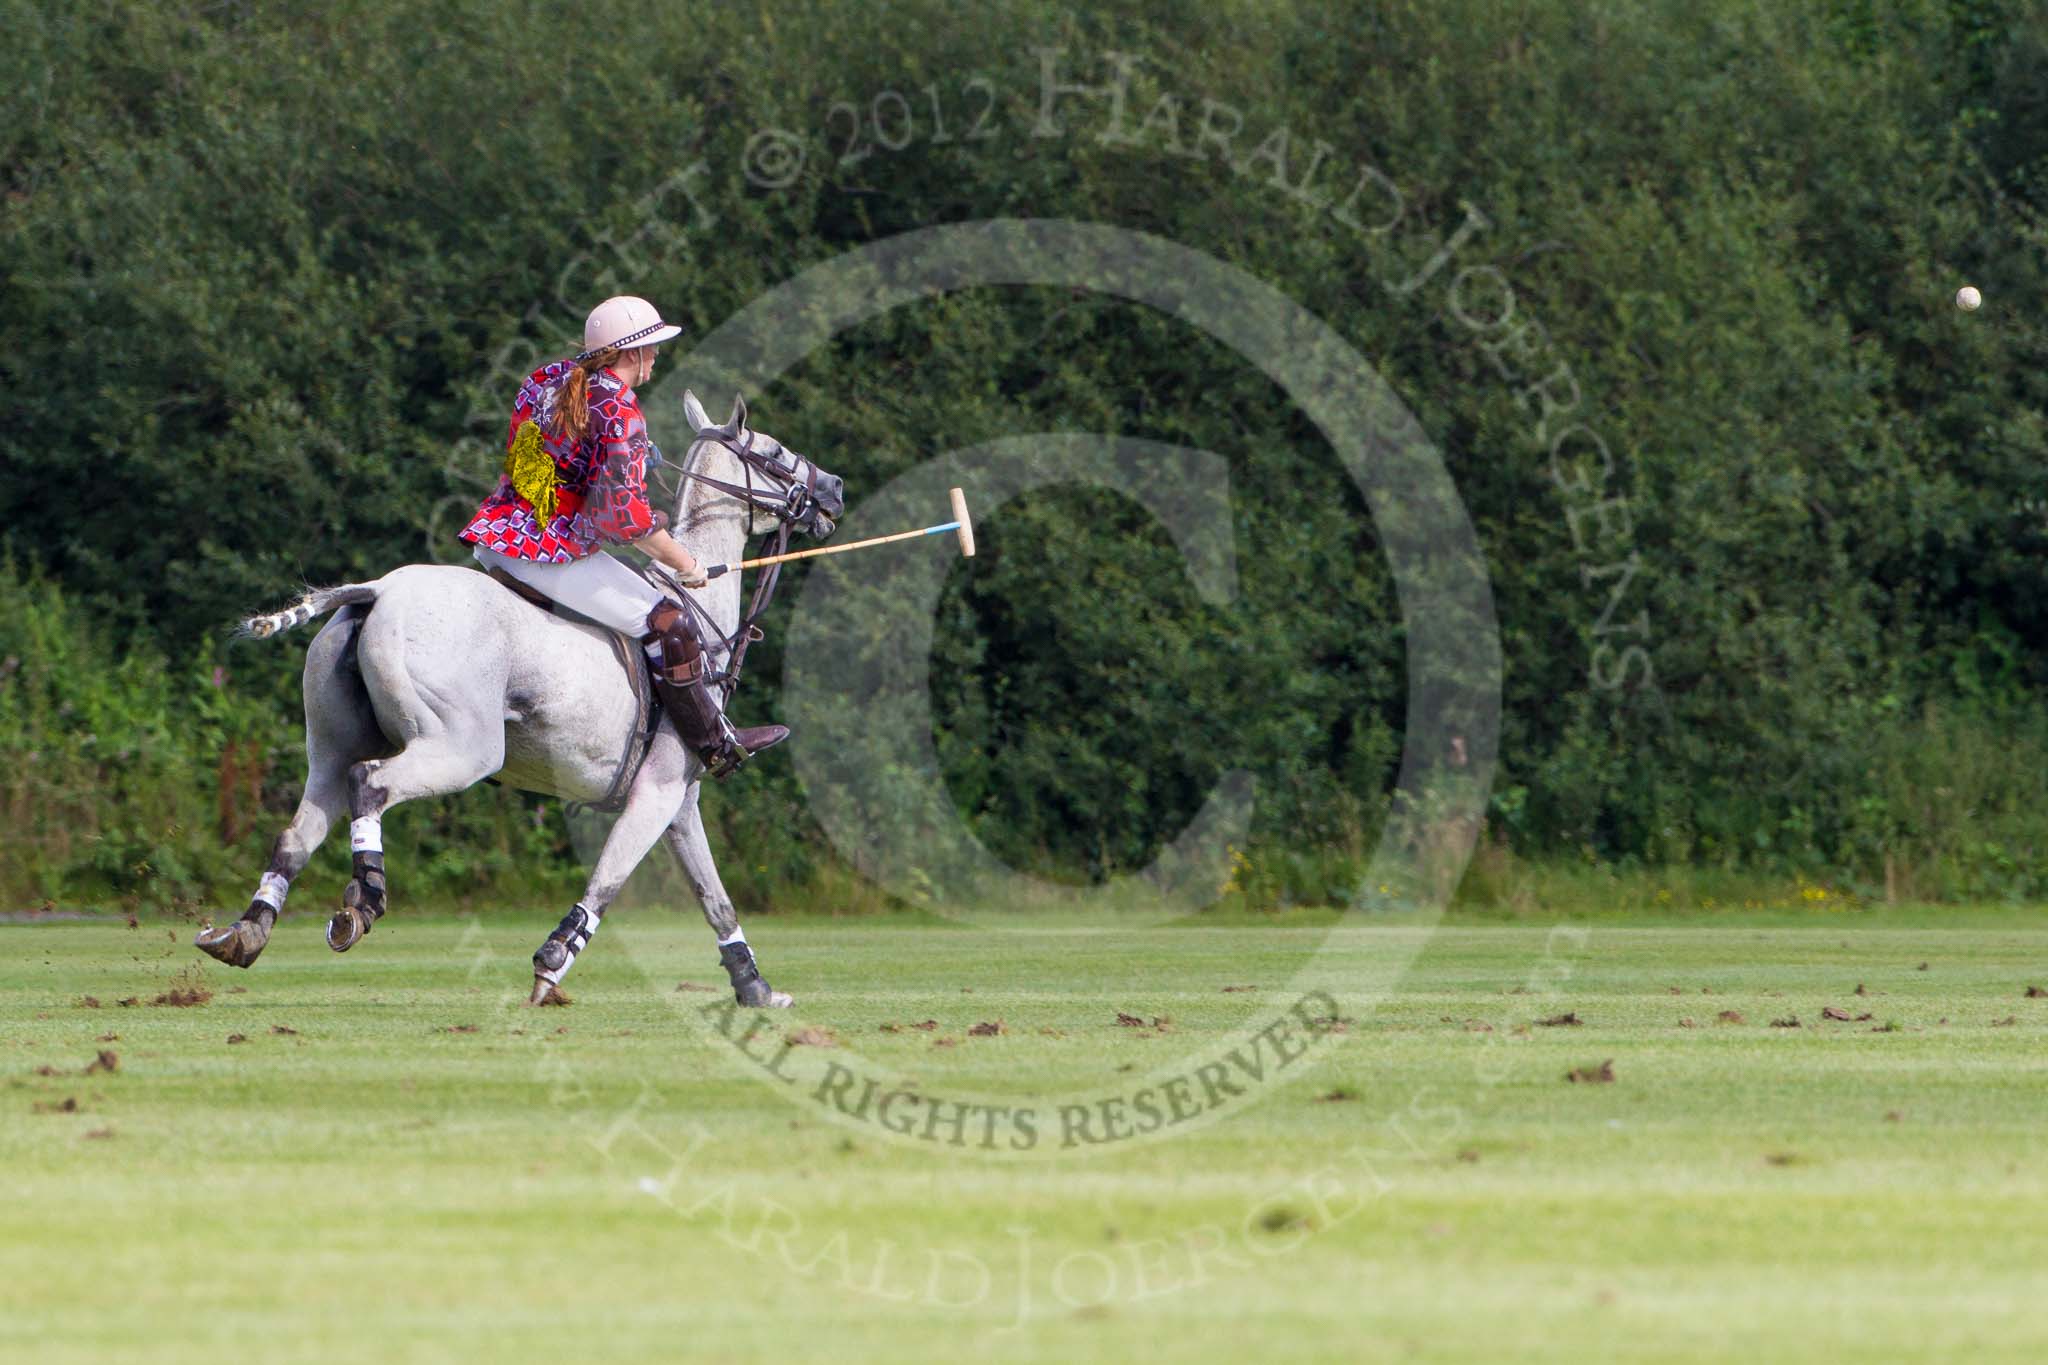 7th Heritage Polo Cup finals: AMG PETROENERGY Polo Player Erin Jones..
Hurtwood Park Polo Club,
Ewhurst Green,
Surrey,
United Kingdom,
on 05 August 2012 at 15:58, image #202